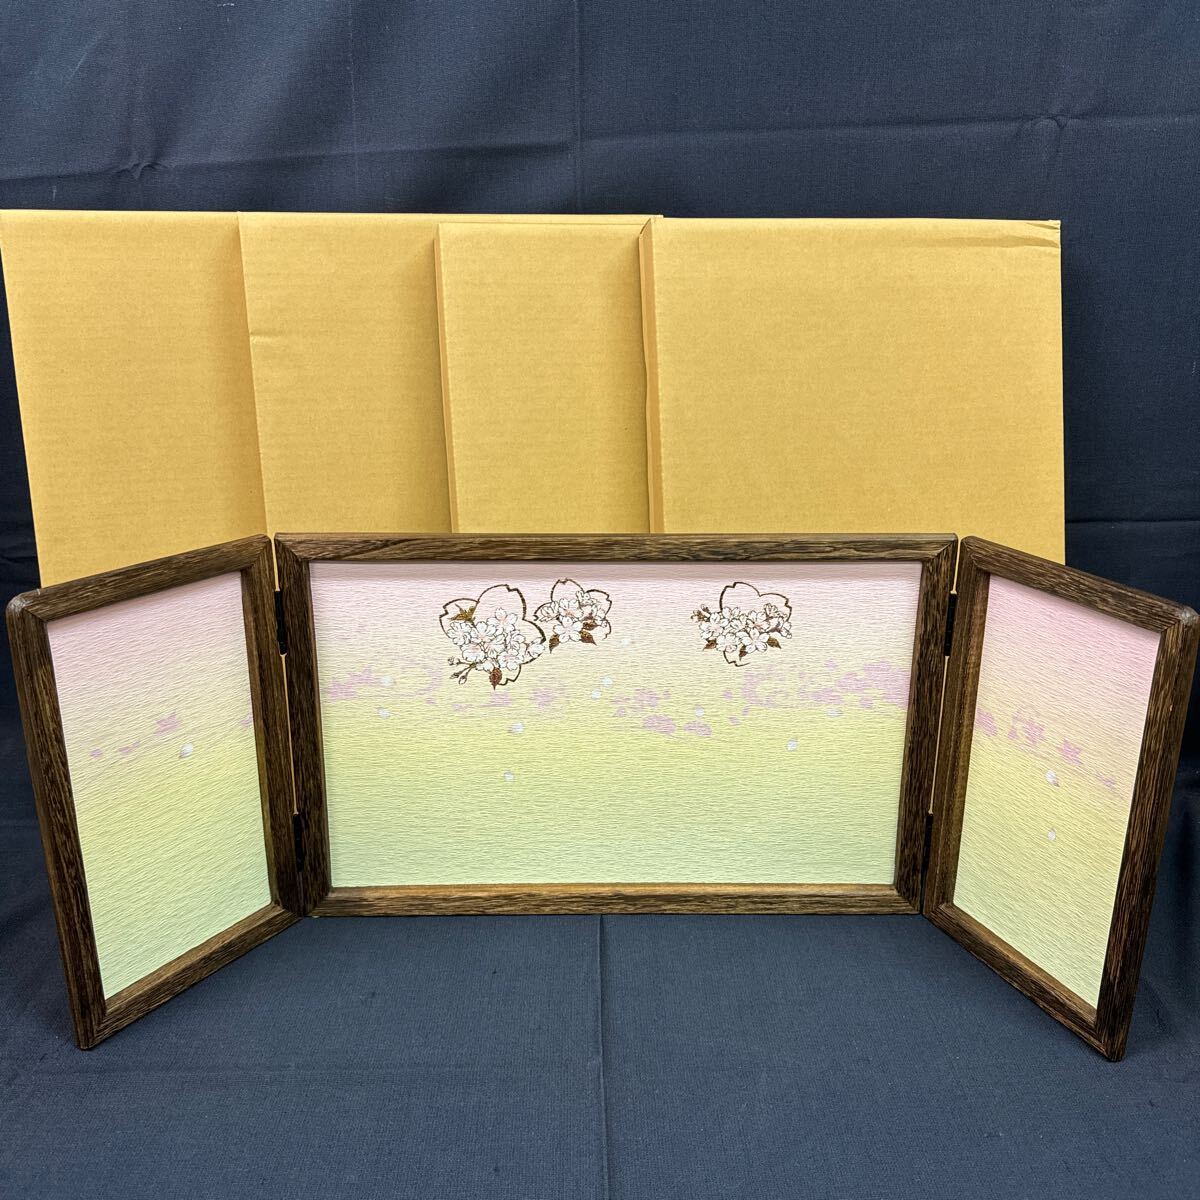 ◆Unused stored items Baked paulownia folding screen 4-piece set Sold in bulk No. 10 Contour cherry blossoms Height approx. 30cm Hina dolls Doll's festival Hina dolls Decoration Interior Lucky charms 155-81, season, Annual event, Doll's Festival, Hina doll